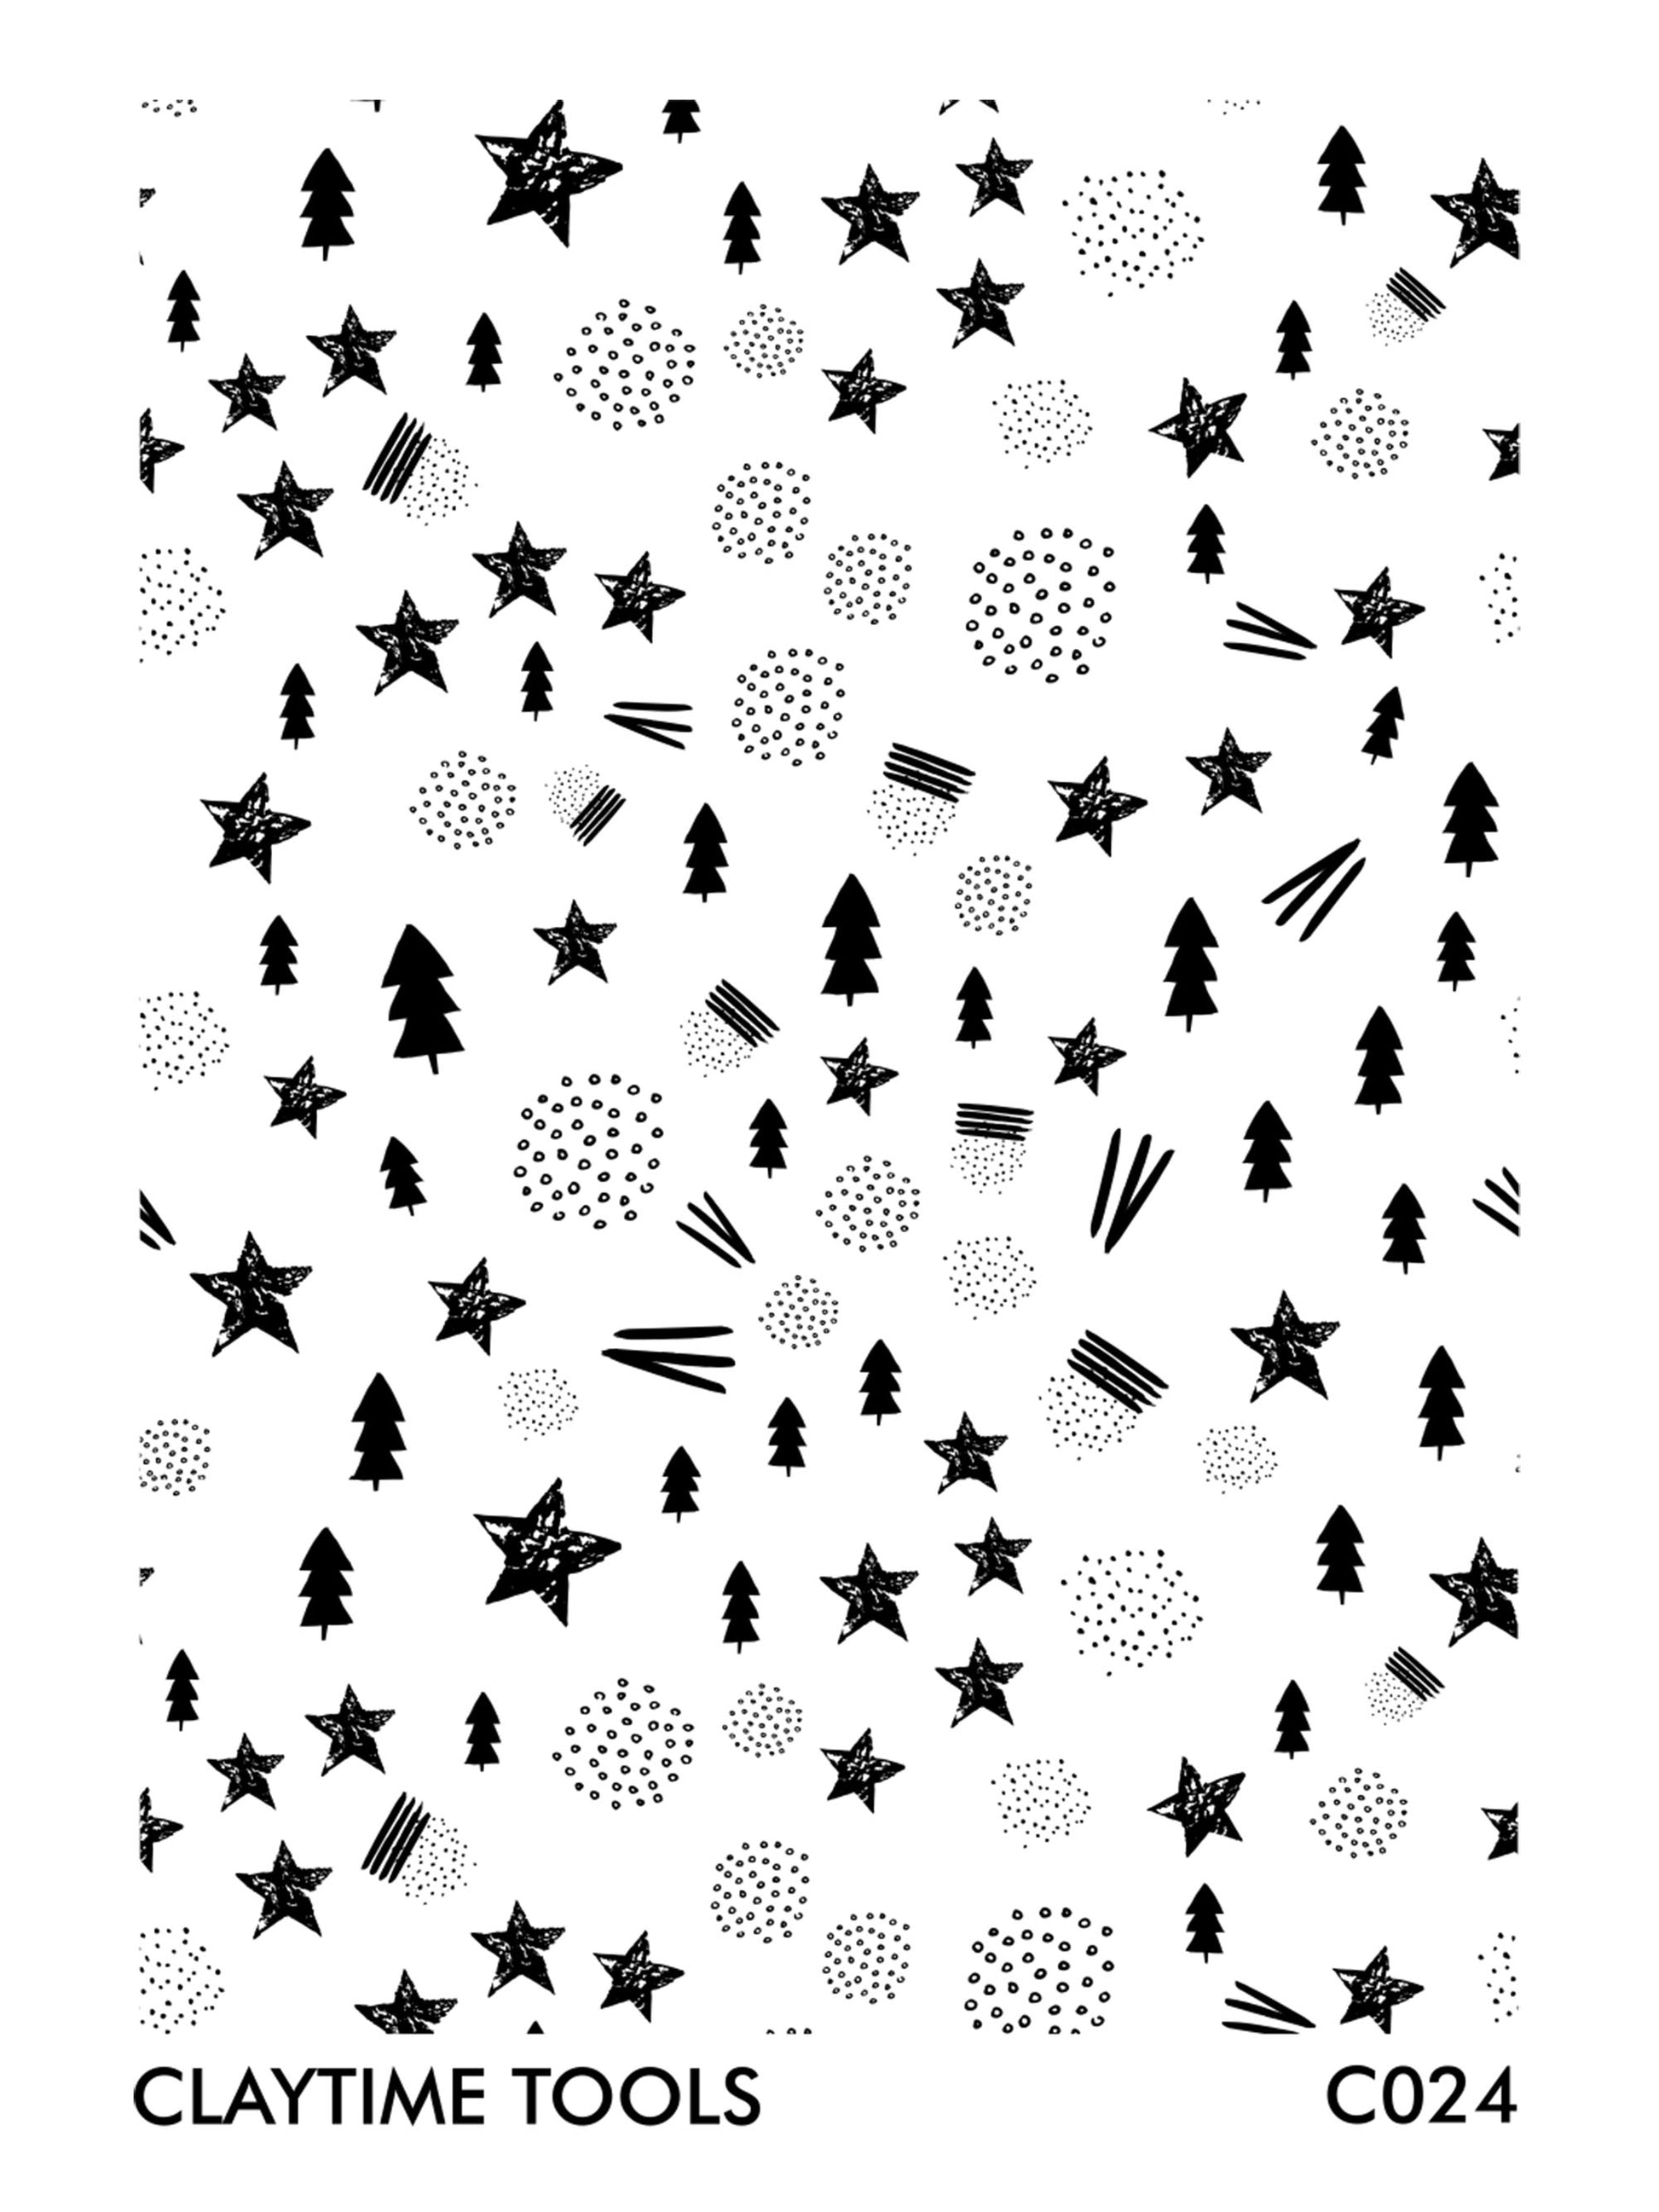 Image of a silkscreen print with hand-drawn Christmas trees, stars and shapes.